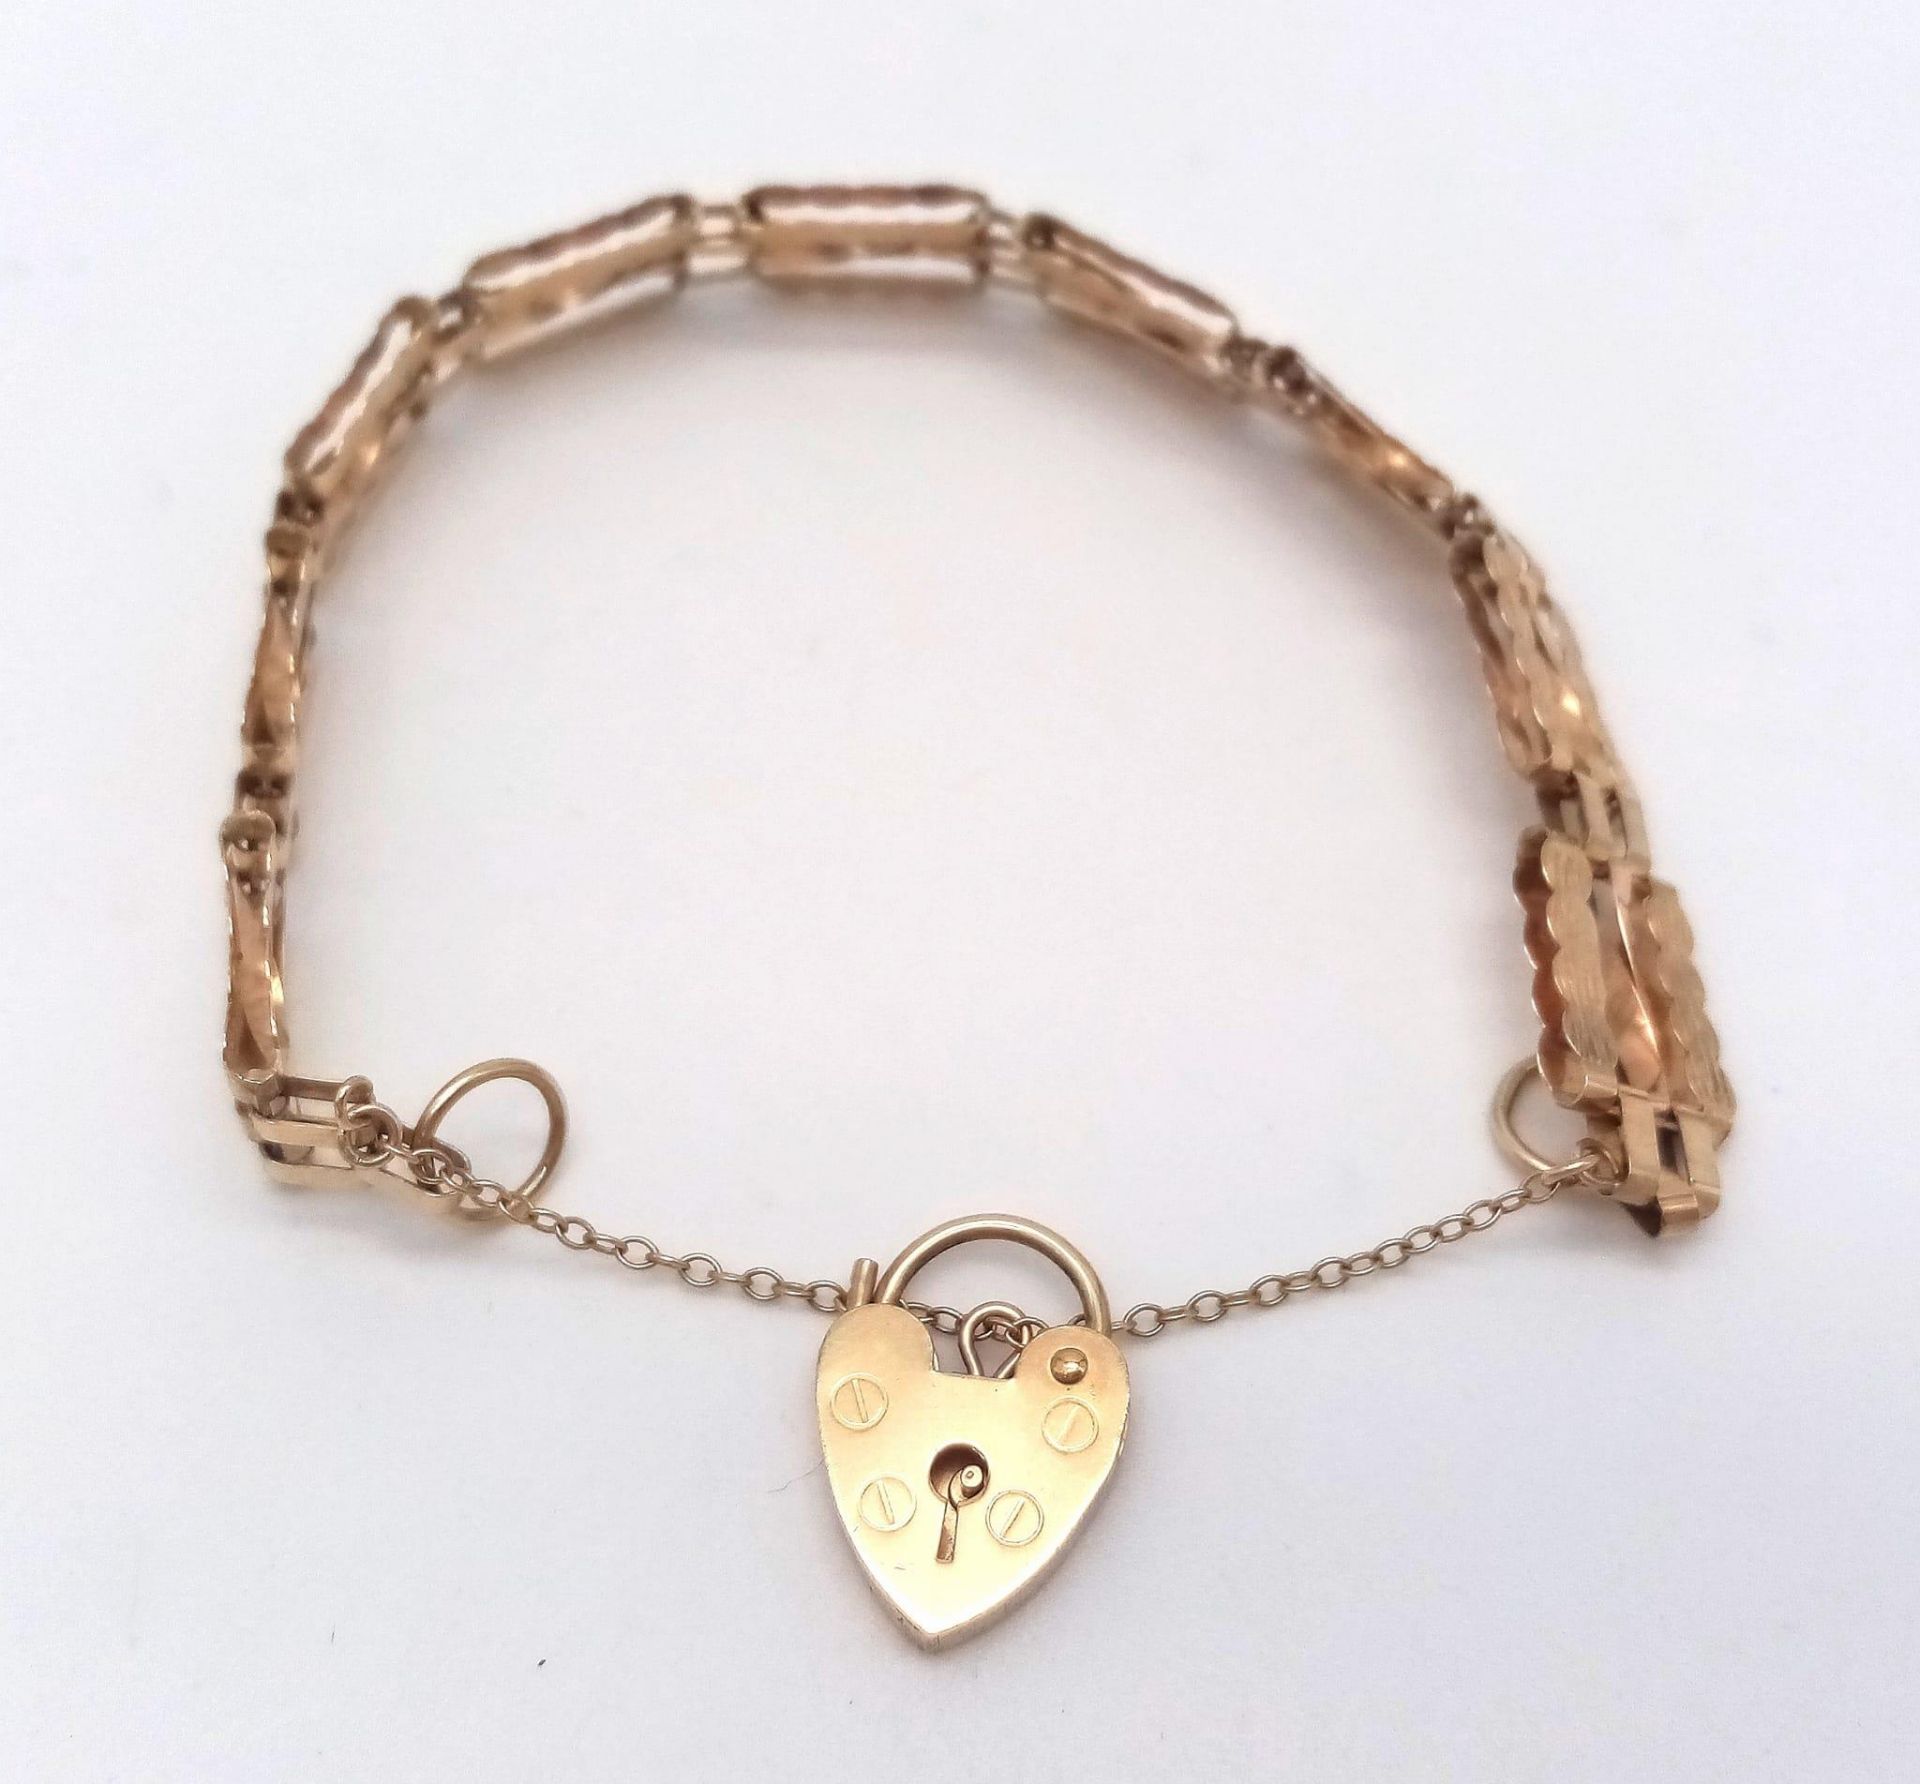 AN ANTIQUE 9K GOLD NICELY PATTERNED GATE BRACELET WITH HEART PADLOCK AND SAFETY CHAIN . 8.1gms - Image 5 of 9